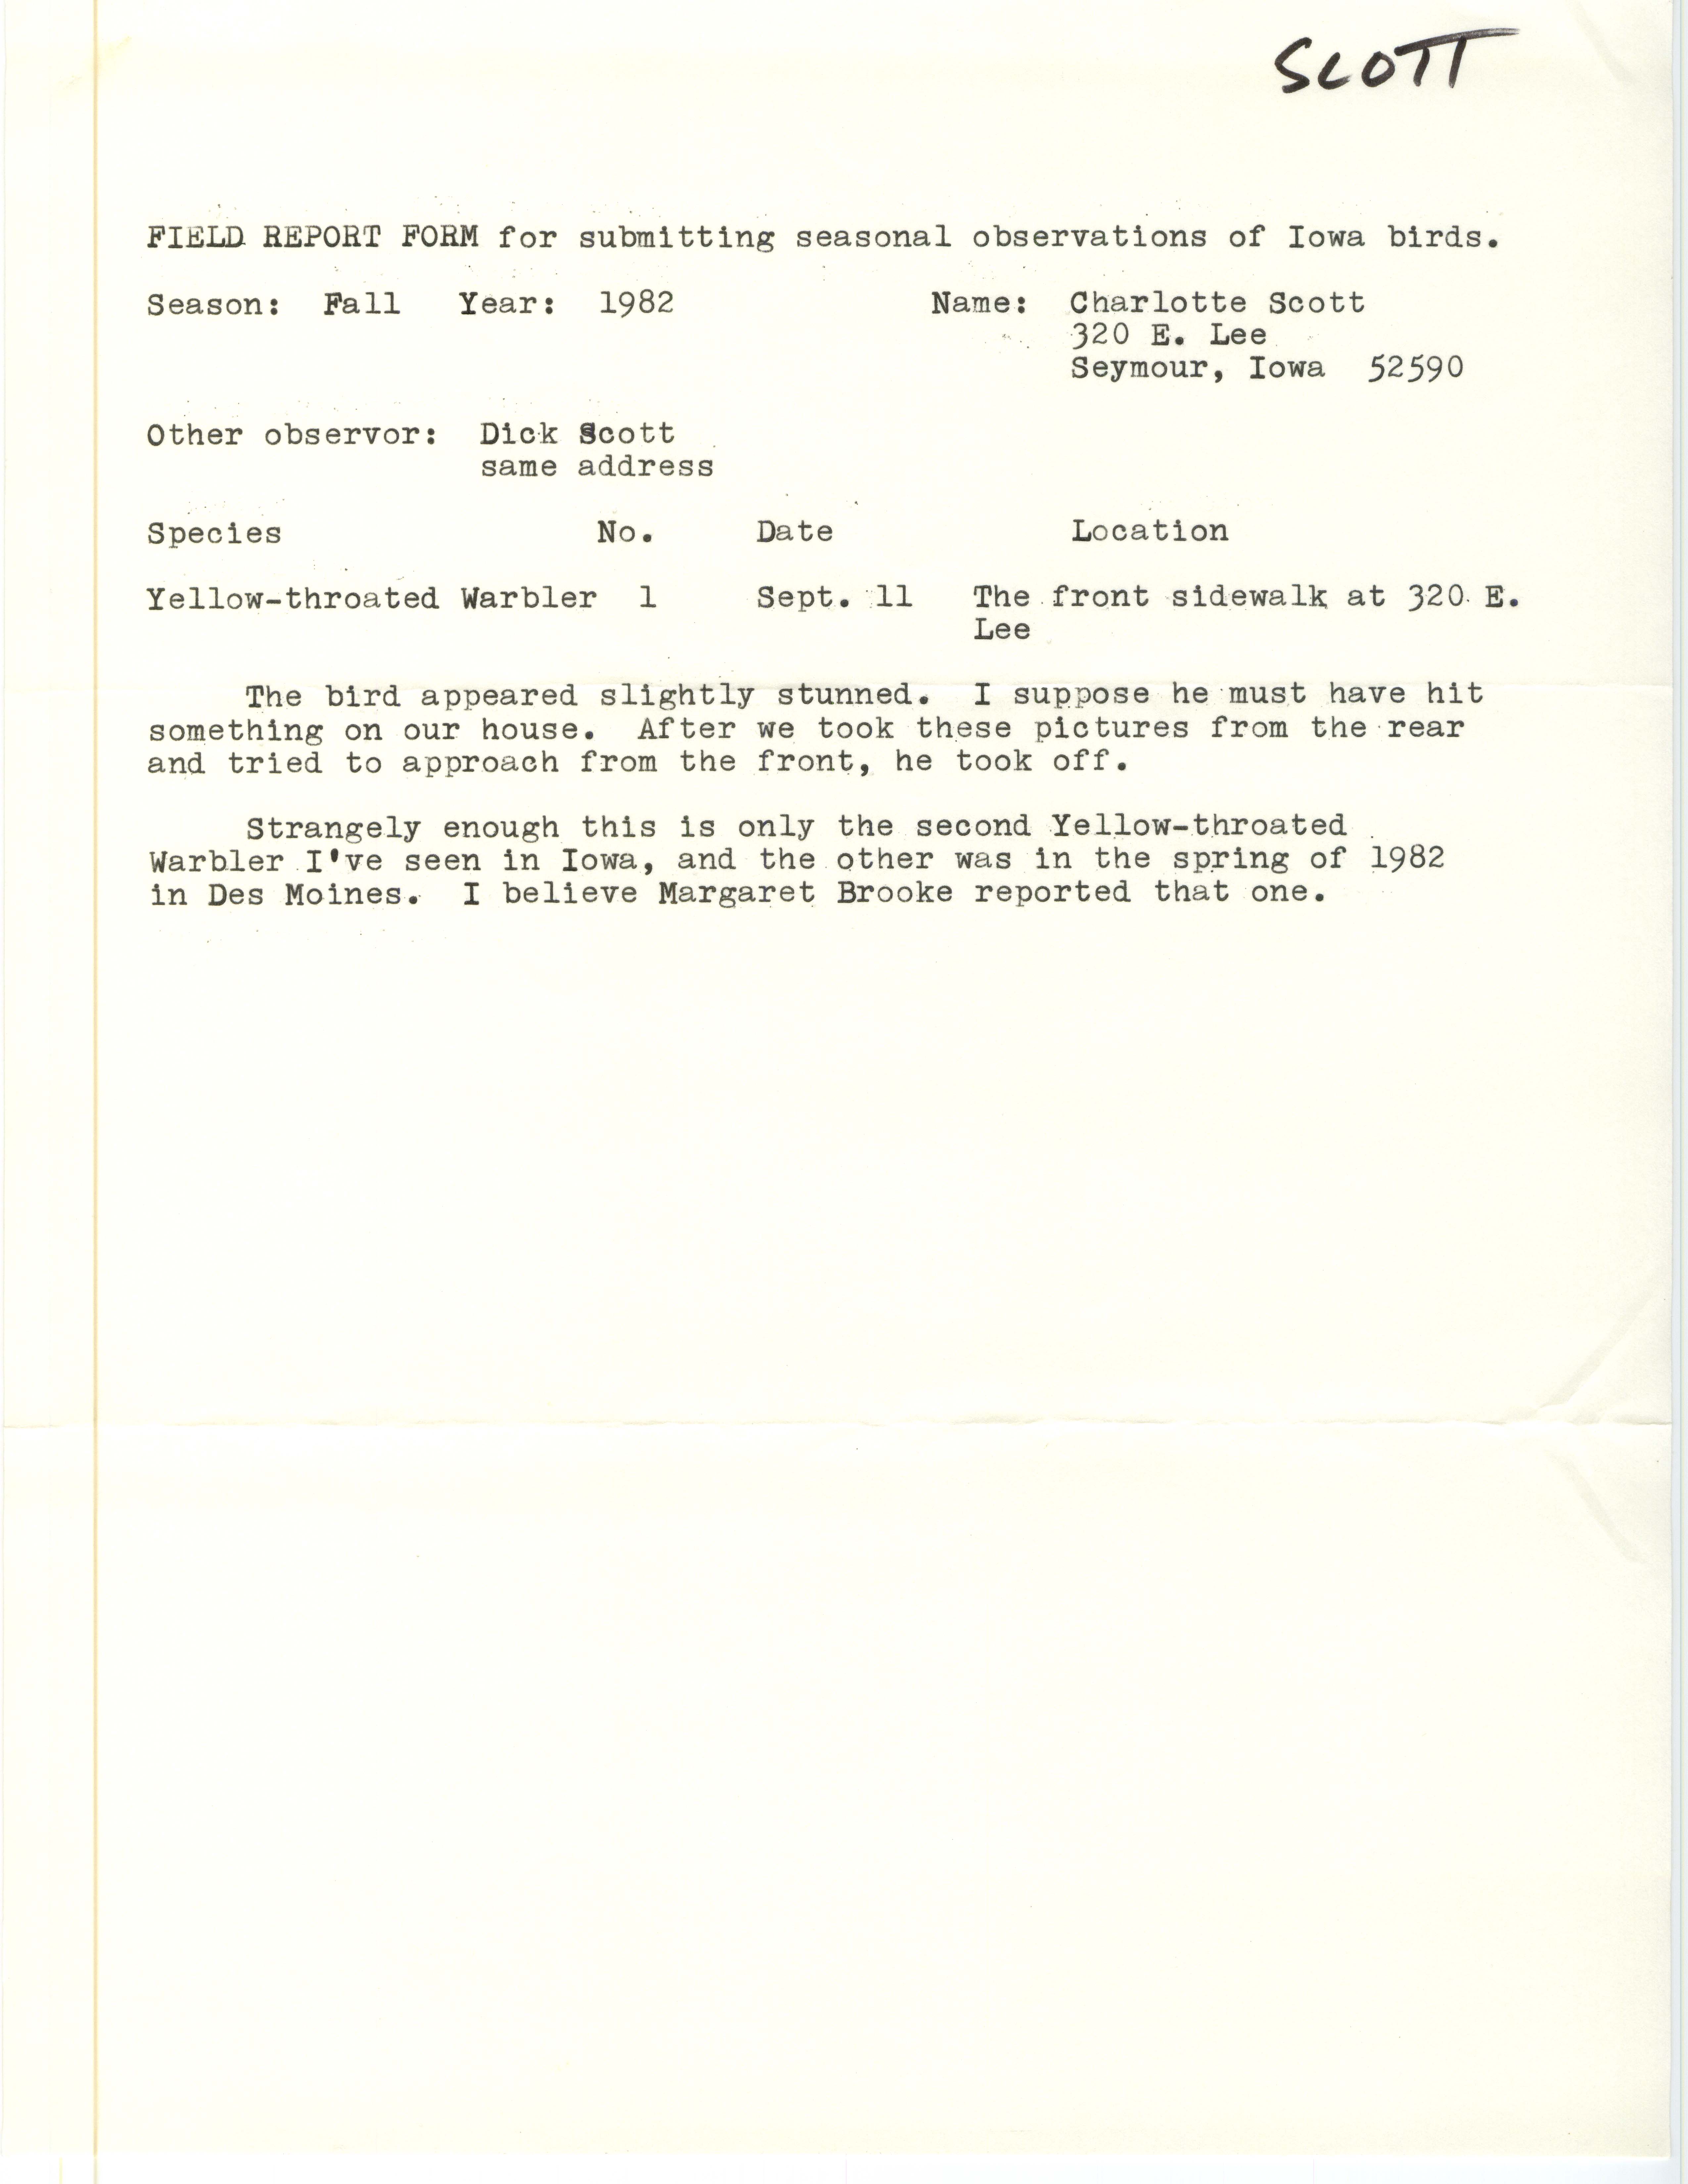 Field notes contributed by Charlotte Scott, fall 1982